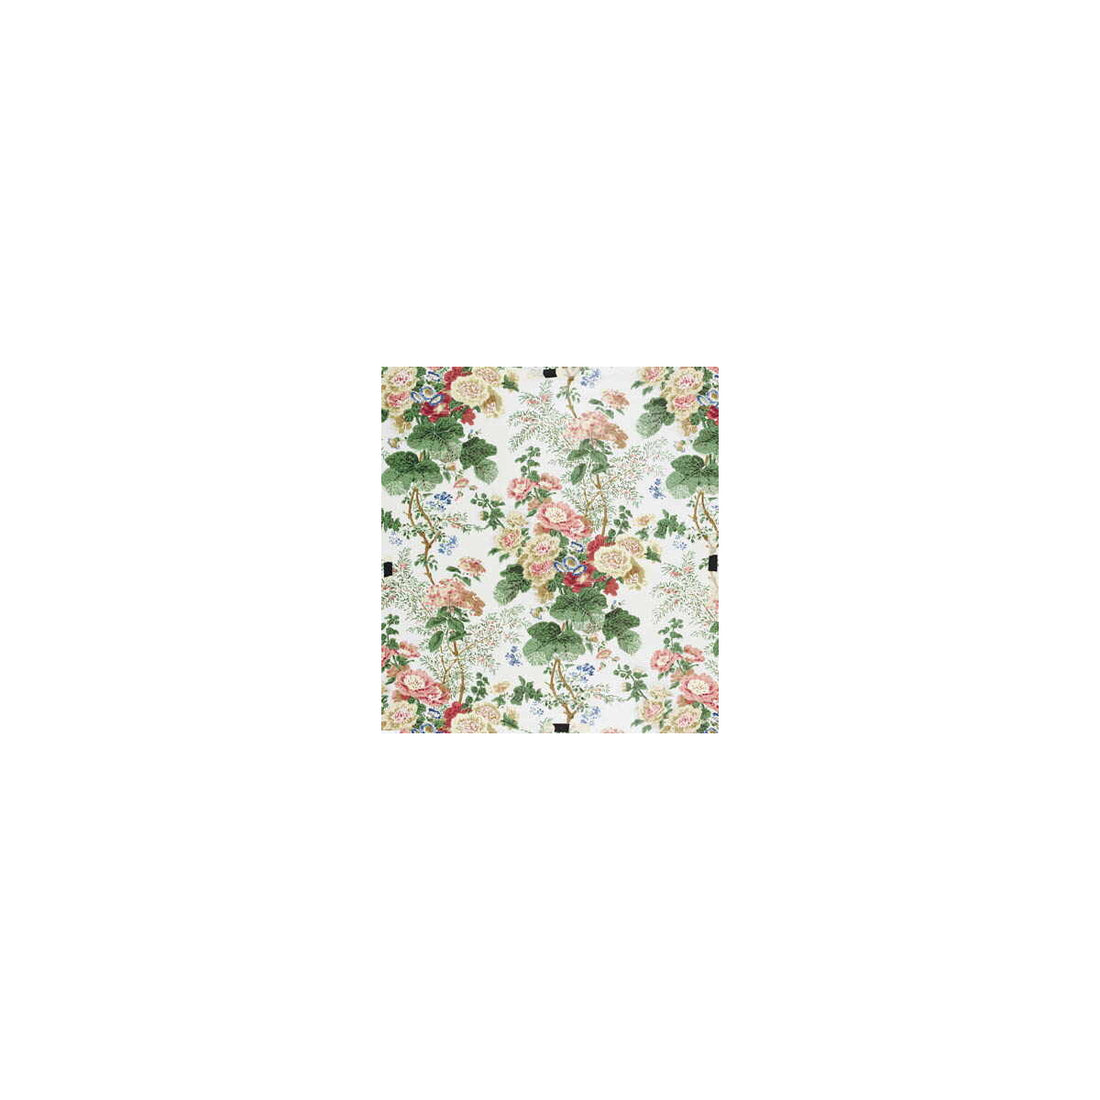 Hollyhock Hdb fabric in white/coral color - pattern 7128.LJ.0 - by Lee Jofa